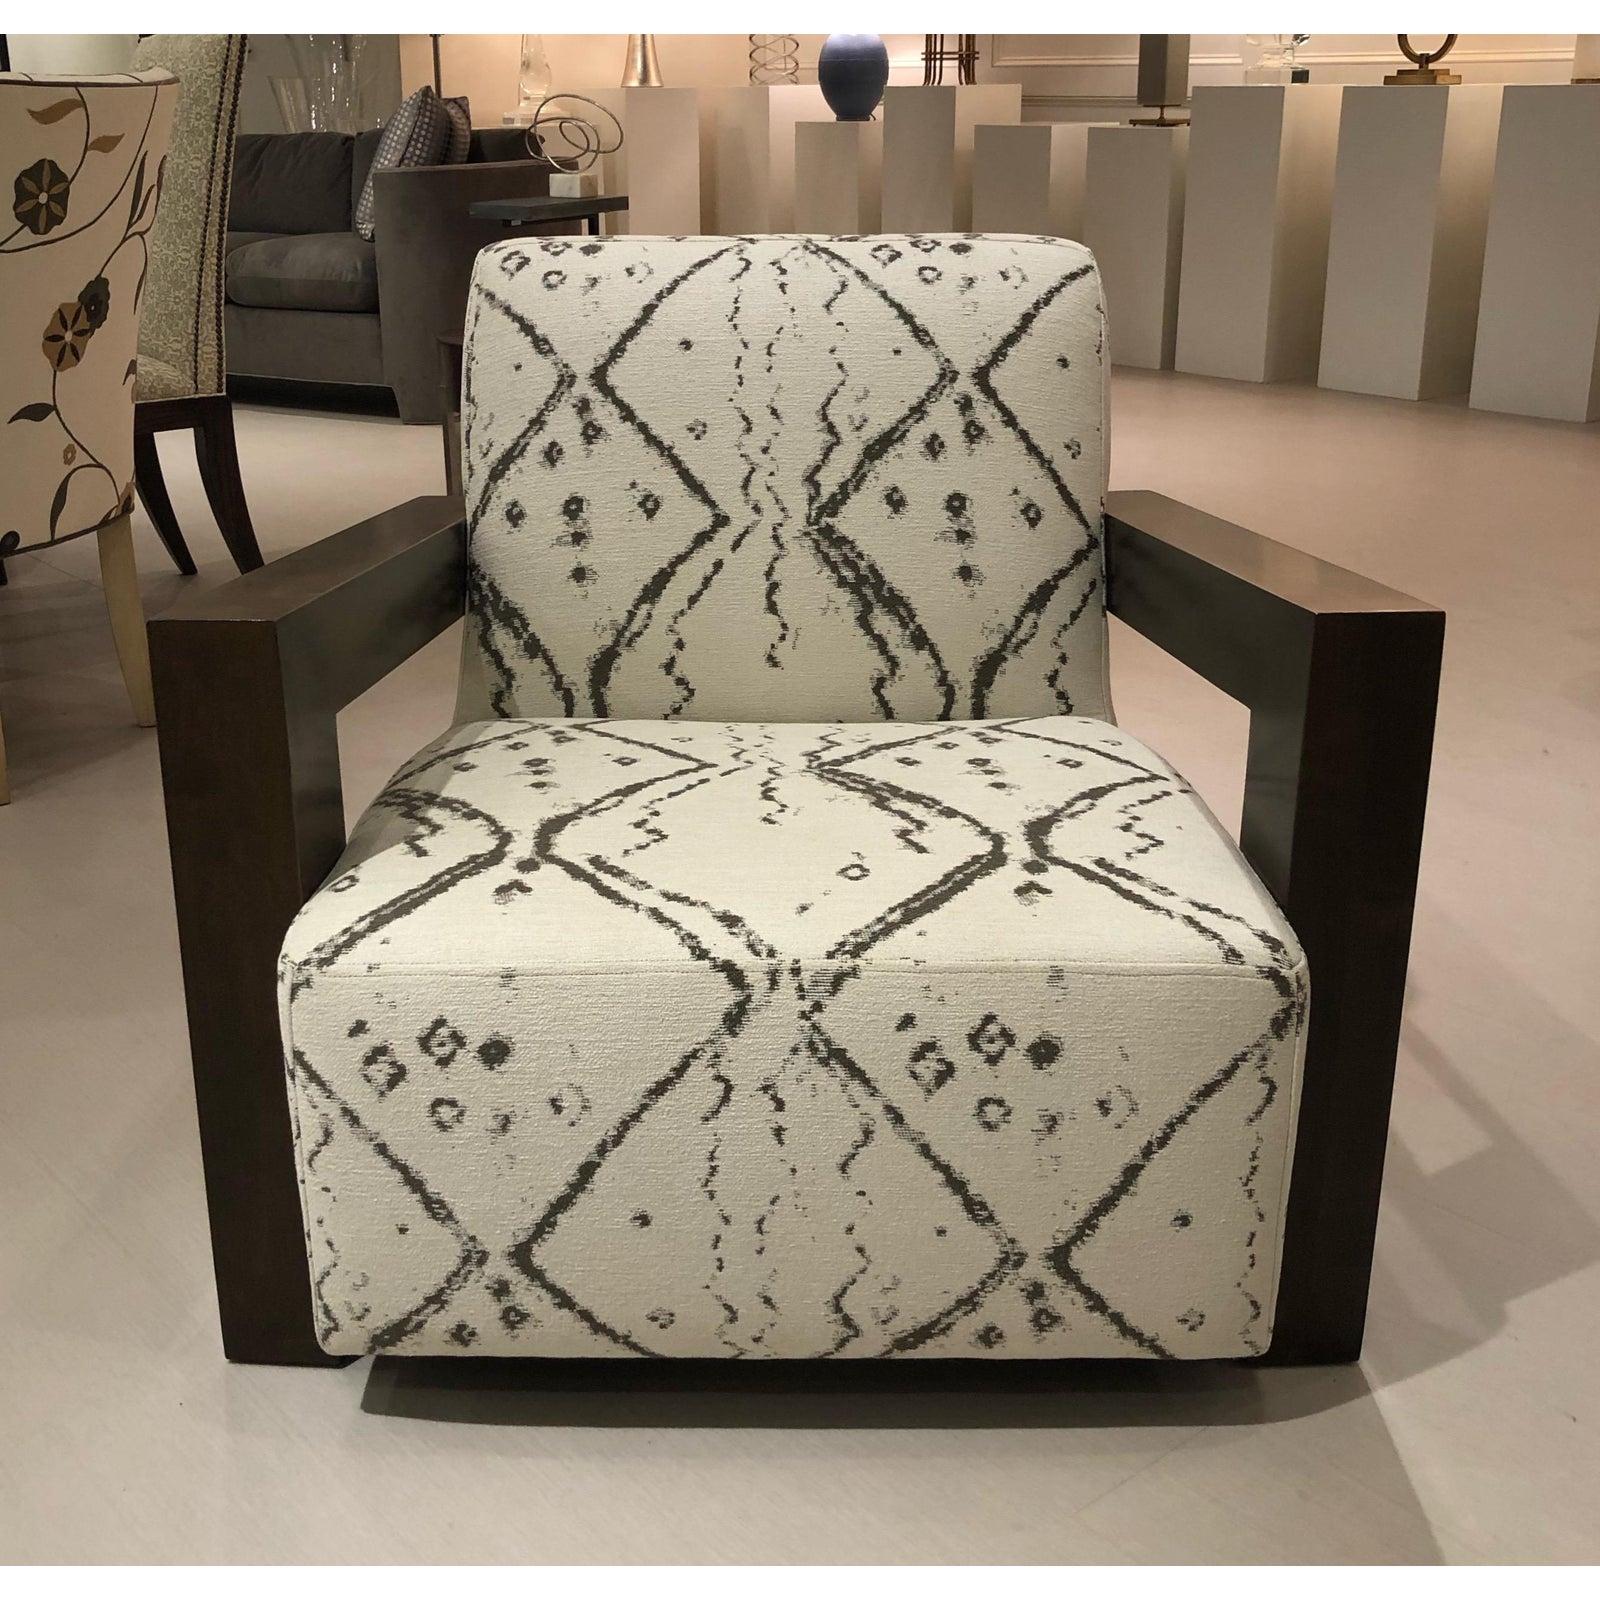 Showroom New. Nathan Anthony is known for their award winning furniture designs. The Kinetic chair has a modern flair but easily works in a more transitional or even rustic setting. The chair sports a dramatic wood frame and a comfortable sit. This